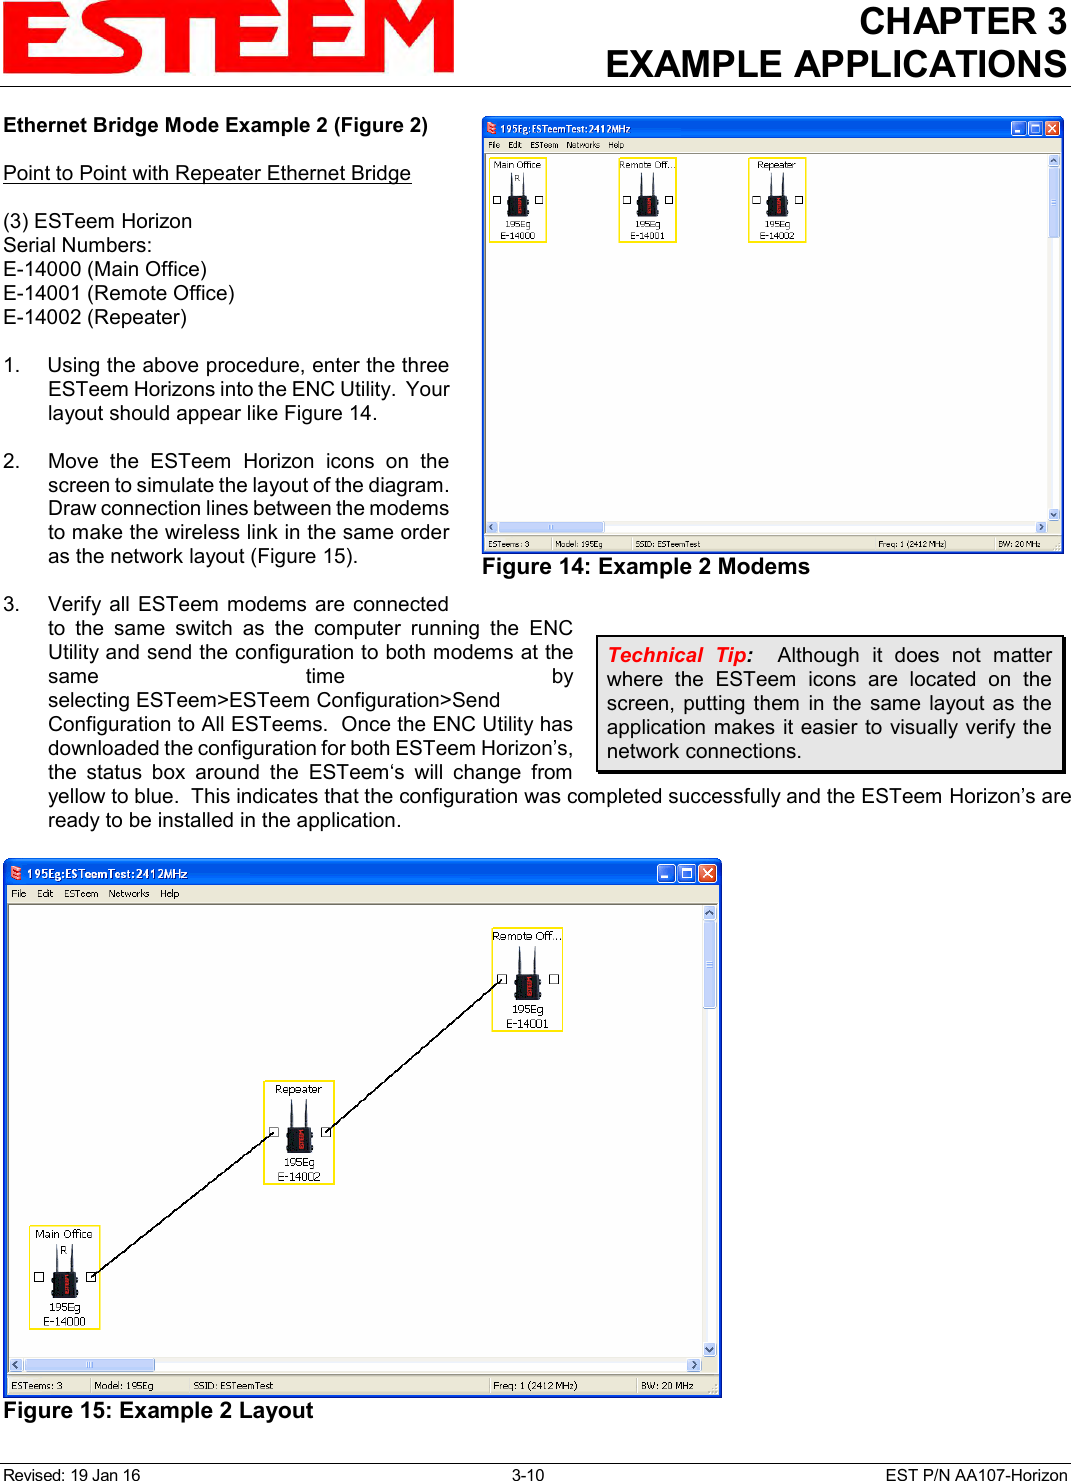 CHAPTER 3 EXAMPLE APPLICATIONS  Revised: 19 Jan 16  3-10  EST P/N AA107-Horizon Ethernet Bridge Mode Example 2 (Figure 2)  Point to Point with Repeater Ethernet Bridge  (3) ESTeem Horizon Serial Numbers: E-14000 (Main Office) E-14001 (Remote Office) E-14002 (Repeater)  1.    Using the above procedure, enter the three ESTeem Horizons into the ENC Utility.  Your layout should appear like Figure 14.   2.    Move  the  ESTeem  Horizon  icons  on  the screen to simulate the layout of the diagram.  Draw connection lines between the modems to make the wireless link in the same order as the network layout (Figure 15).  3.    Verify  all  ESTeem modems are  connected to  the  same  switch  as  the  computer  running  the  ENC Utility and send the configuration to both modems at the same  time  by selecting ESTeem&gt;ESTeem Configuration&gt;Send Configuration to All ESTeems.  Once the ENC Utility has downloaded the configuration for both ESTeem Horizon’s, the  status  box  around  the  ESTeem‘s  will  change  from yellow to blue.  This indicates that the configuration was completed successfully and the ESTeem Horizon’s are ready to be installed in the application. Technical  Tip:    Although  it  does  not  matter where  the  ESTeem  icons  are  located  on  the screen,  putting them  in  the  same  layout as  the application makes it easier to visually verify the network connections.  Figure 14: Example 2 Modems   Figure 15: Example 2 Layout  